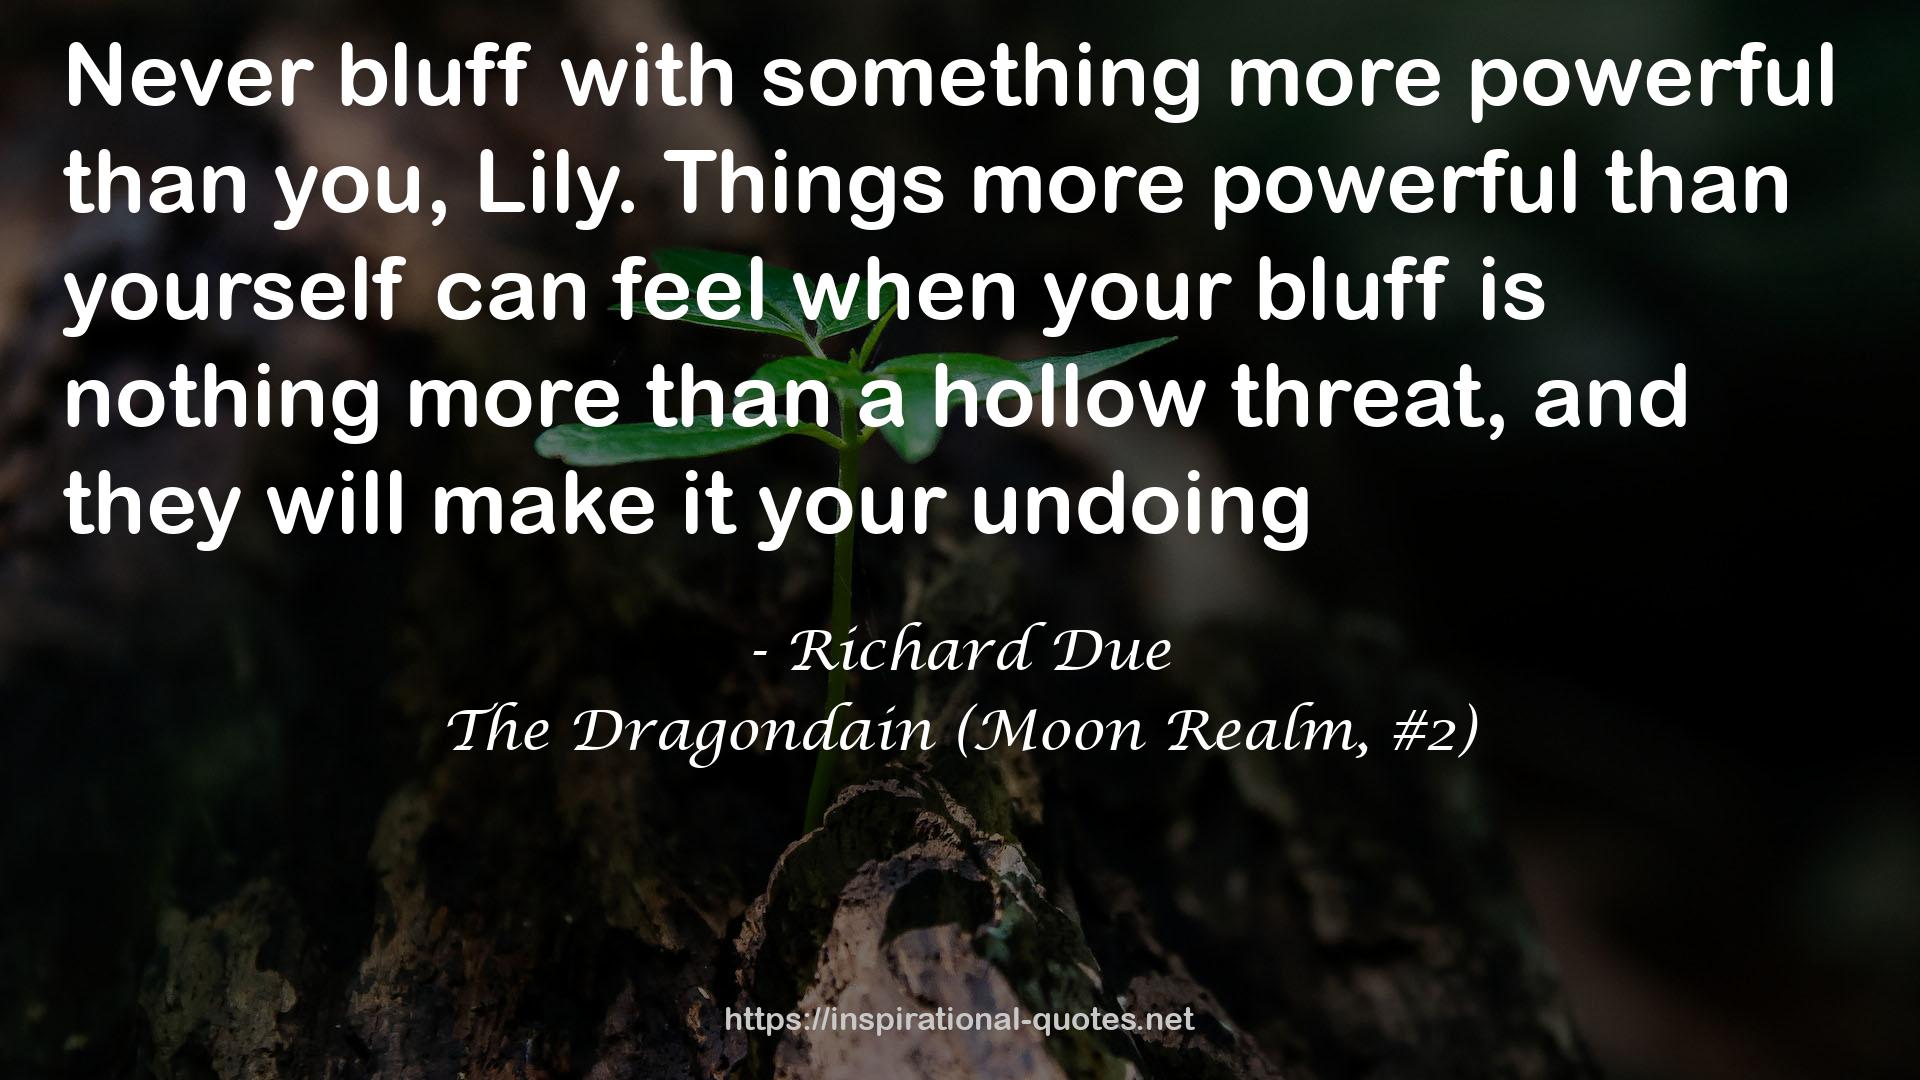 The Dragondain (Moon Realm, #2) QUOTES